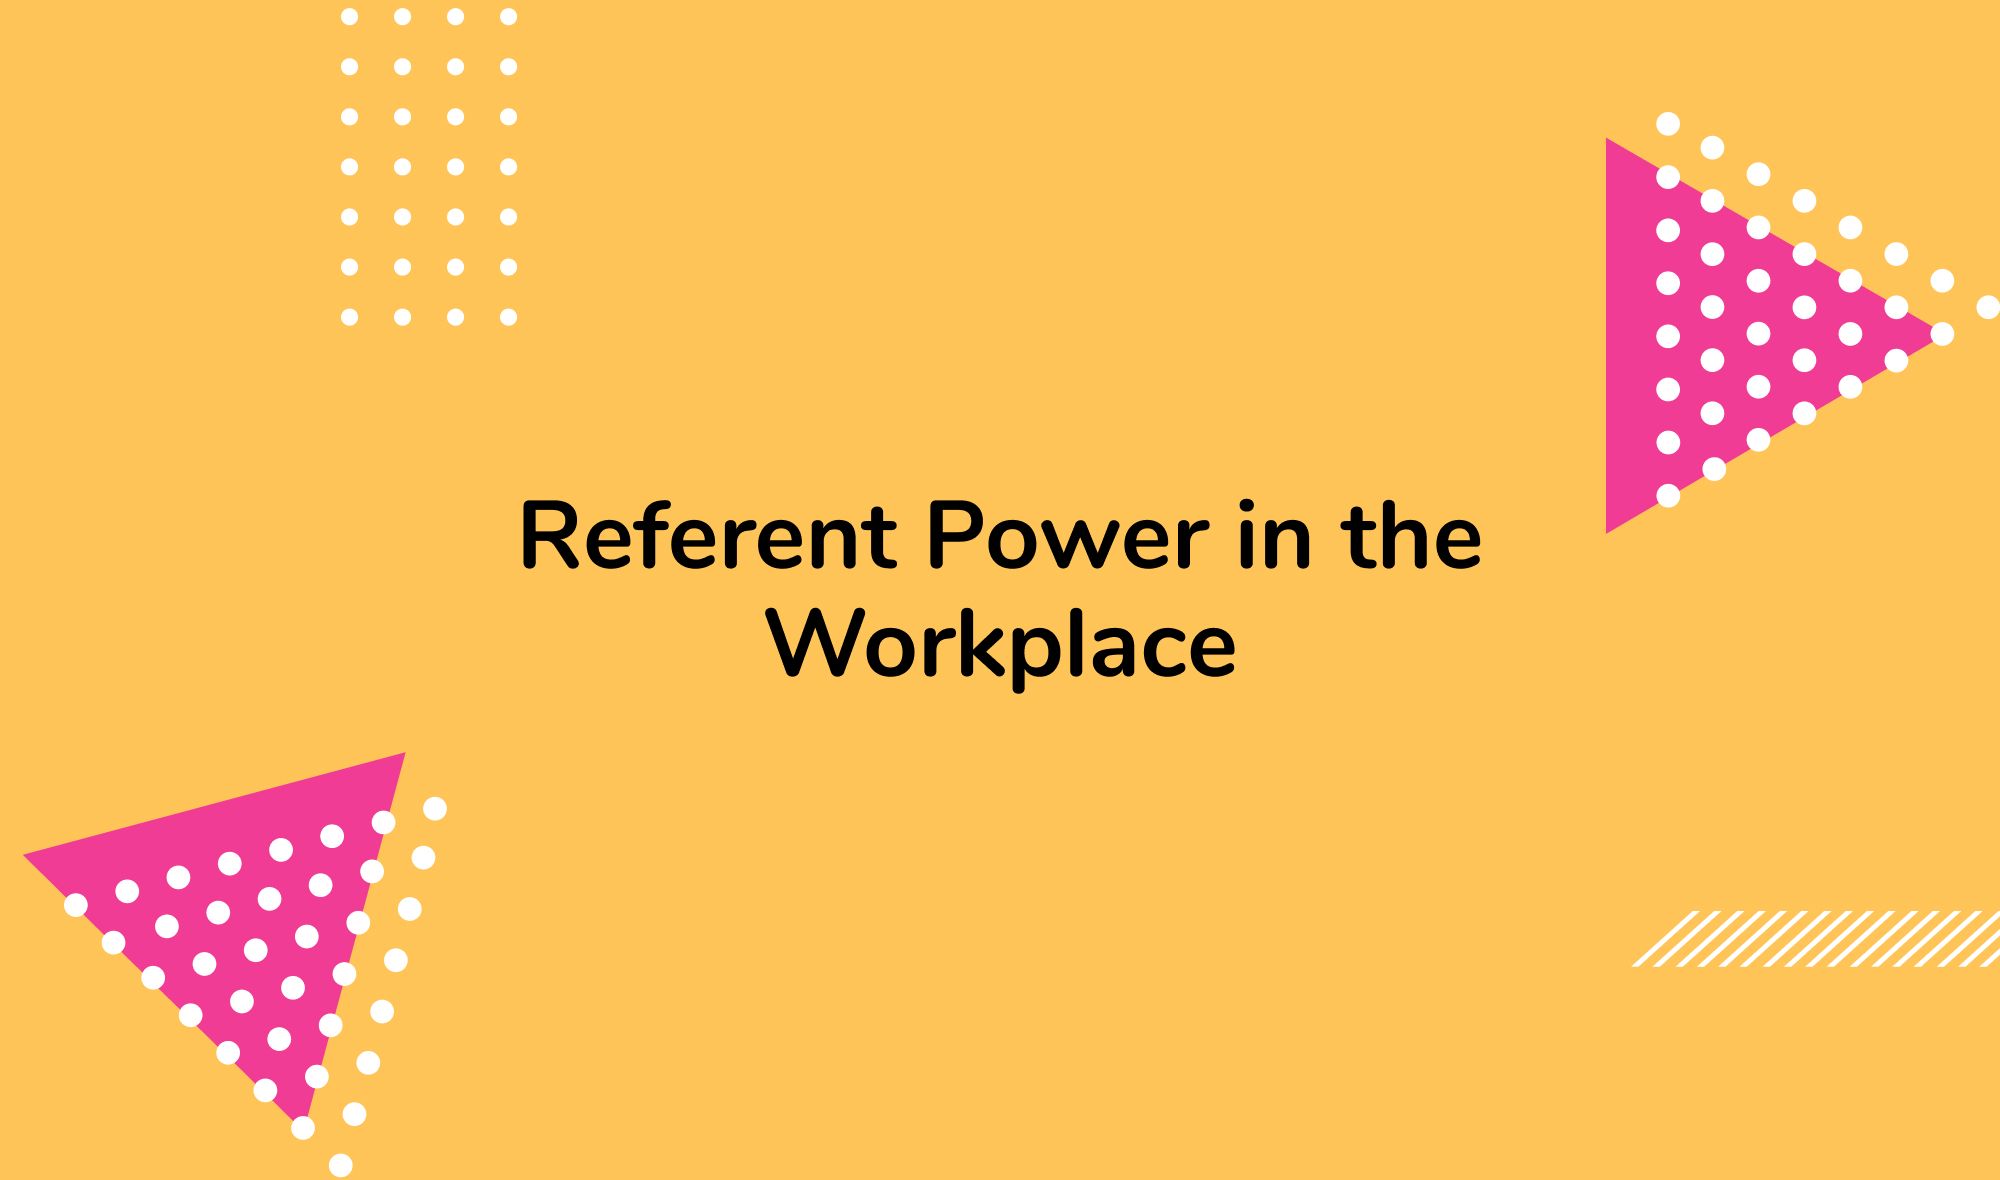 Referent Power in the Workplace